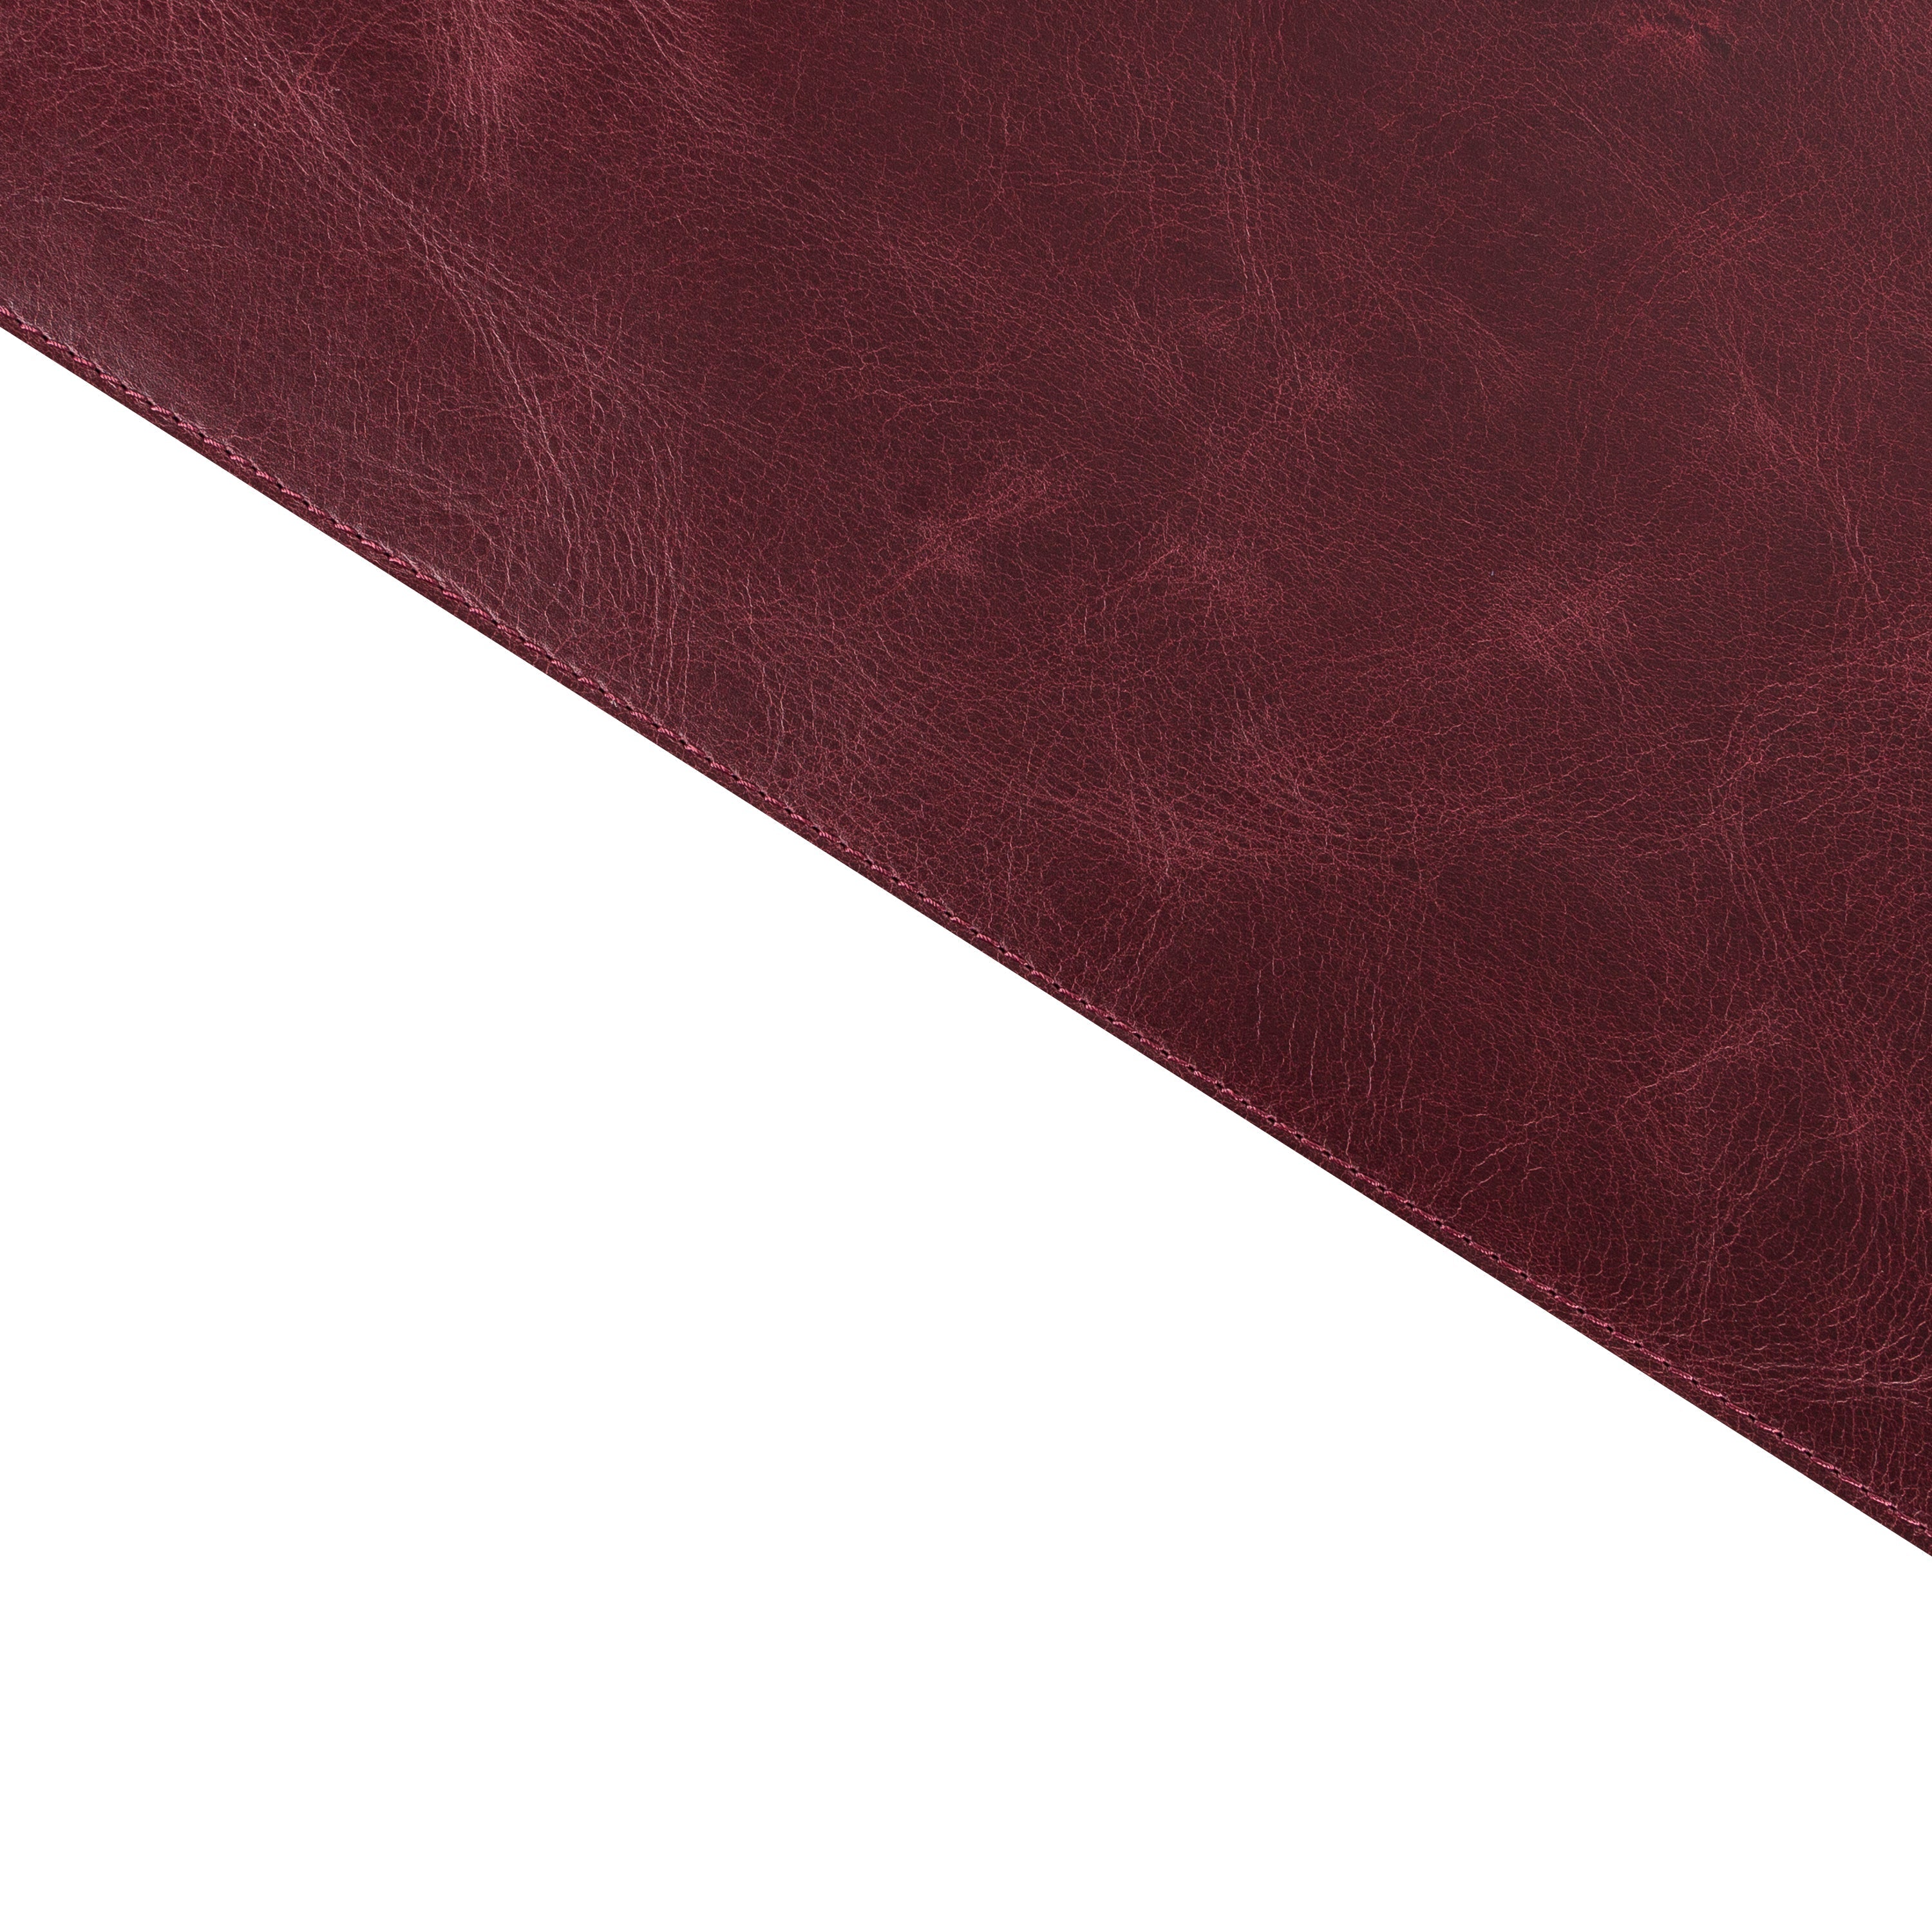 LupinnyLeather Genuine Cherry Leather Deskmat, Computer Pad, Office Desk Pad 2